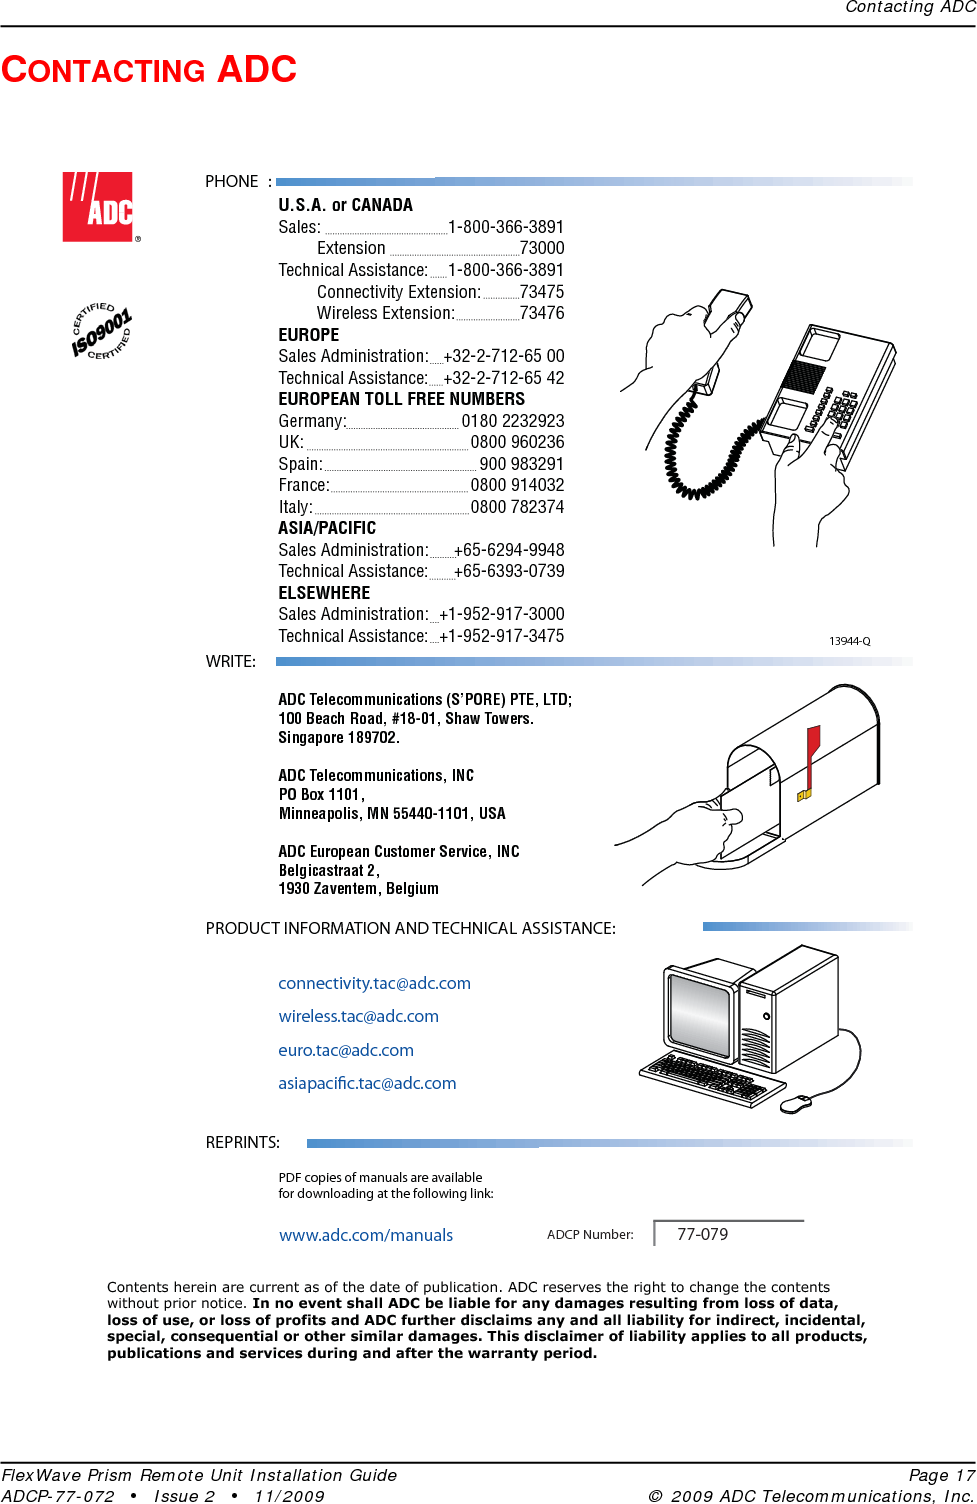 Contacting ADCFlexWave Prism Remote Unit Installation Guide Page 17ADCP-77-072 • Issue 2 • 11/2009 © 2009 ADC Telecommunications, Inc.CONTACTING ADC13944-QContents herein are current as of the date of publication. ADC reserves the right to change the contentswithout prior notice. In no event shall ADC be liable for any damages resulting from loss of data,loss of use, or loss of profits and ADC further disclaims any and all liability for indirect, incidental,special, consequential or other similar damages. This disclaimer of liability applies to all products,publications and services during and after the warranty period.REPRINTS:www.adc.com/manualsPDF copies of manuals are availablefor downloading at the following link:PRODUCT INFORMATION AND TECHNICAL ASSISTANCE:connectivity.tac@adc.comwireless.tac@adc.comeuro.tac@adc.comasiapacic.tac@adc.comADCP Number:WRITE:ADC Telecommunications (S’PORE) PTE, LTD;100 Beach Road, #18-01, Shaw Towers.Singapore 189702.ADC Telecommunications, INCPO Box 1101,Minneapolis, MN 55440-1101, USAADC European Customer Service, INCBelgicastraat 2,1930 Zaventem, Belgium77-079PHONE :U.S.A. or CANADASales:     1-800-366-3891 Extension   73000Technical Assistance:  1-800-366-3891 Connectivity Extension: 73475 Wireless Extension:  73476EUROPESales Administration:  +32-2-712-65 00Technical Assistance:  +32-2-712-65 42EUROPEAN TOLL FREE NUMBERSGermany:   0180 2232923UK:     0800 960236Spain:   900 983291France:   0800 914032Italy:     0800 782374ASIA/PACIFICSales Administration:  +65-6294-9948Technical Assistance:  +65-6393-0739ELSEWHERESales Administration:  +1-952-917-3000Technical Assistance:  +1-952-917-3475 